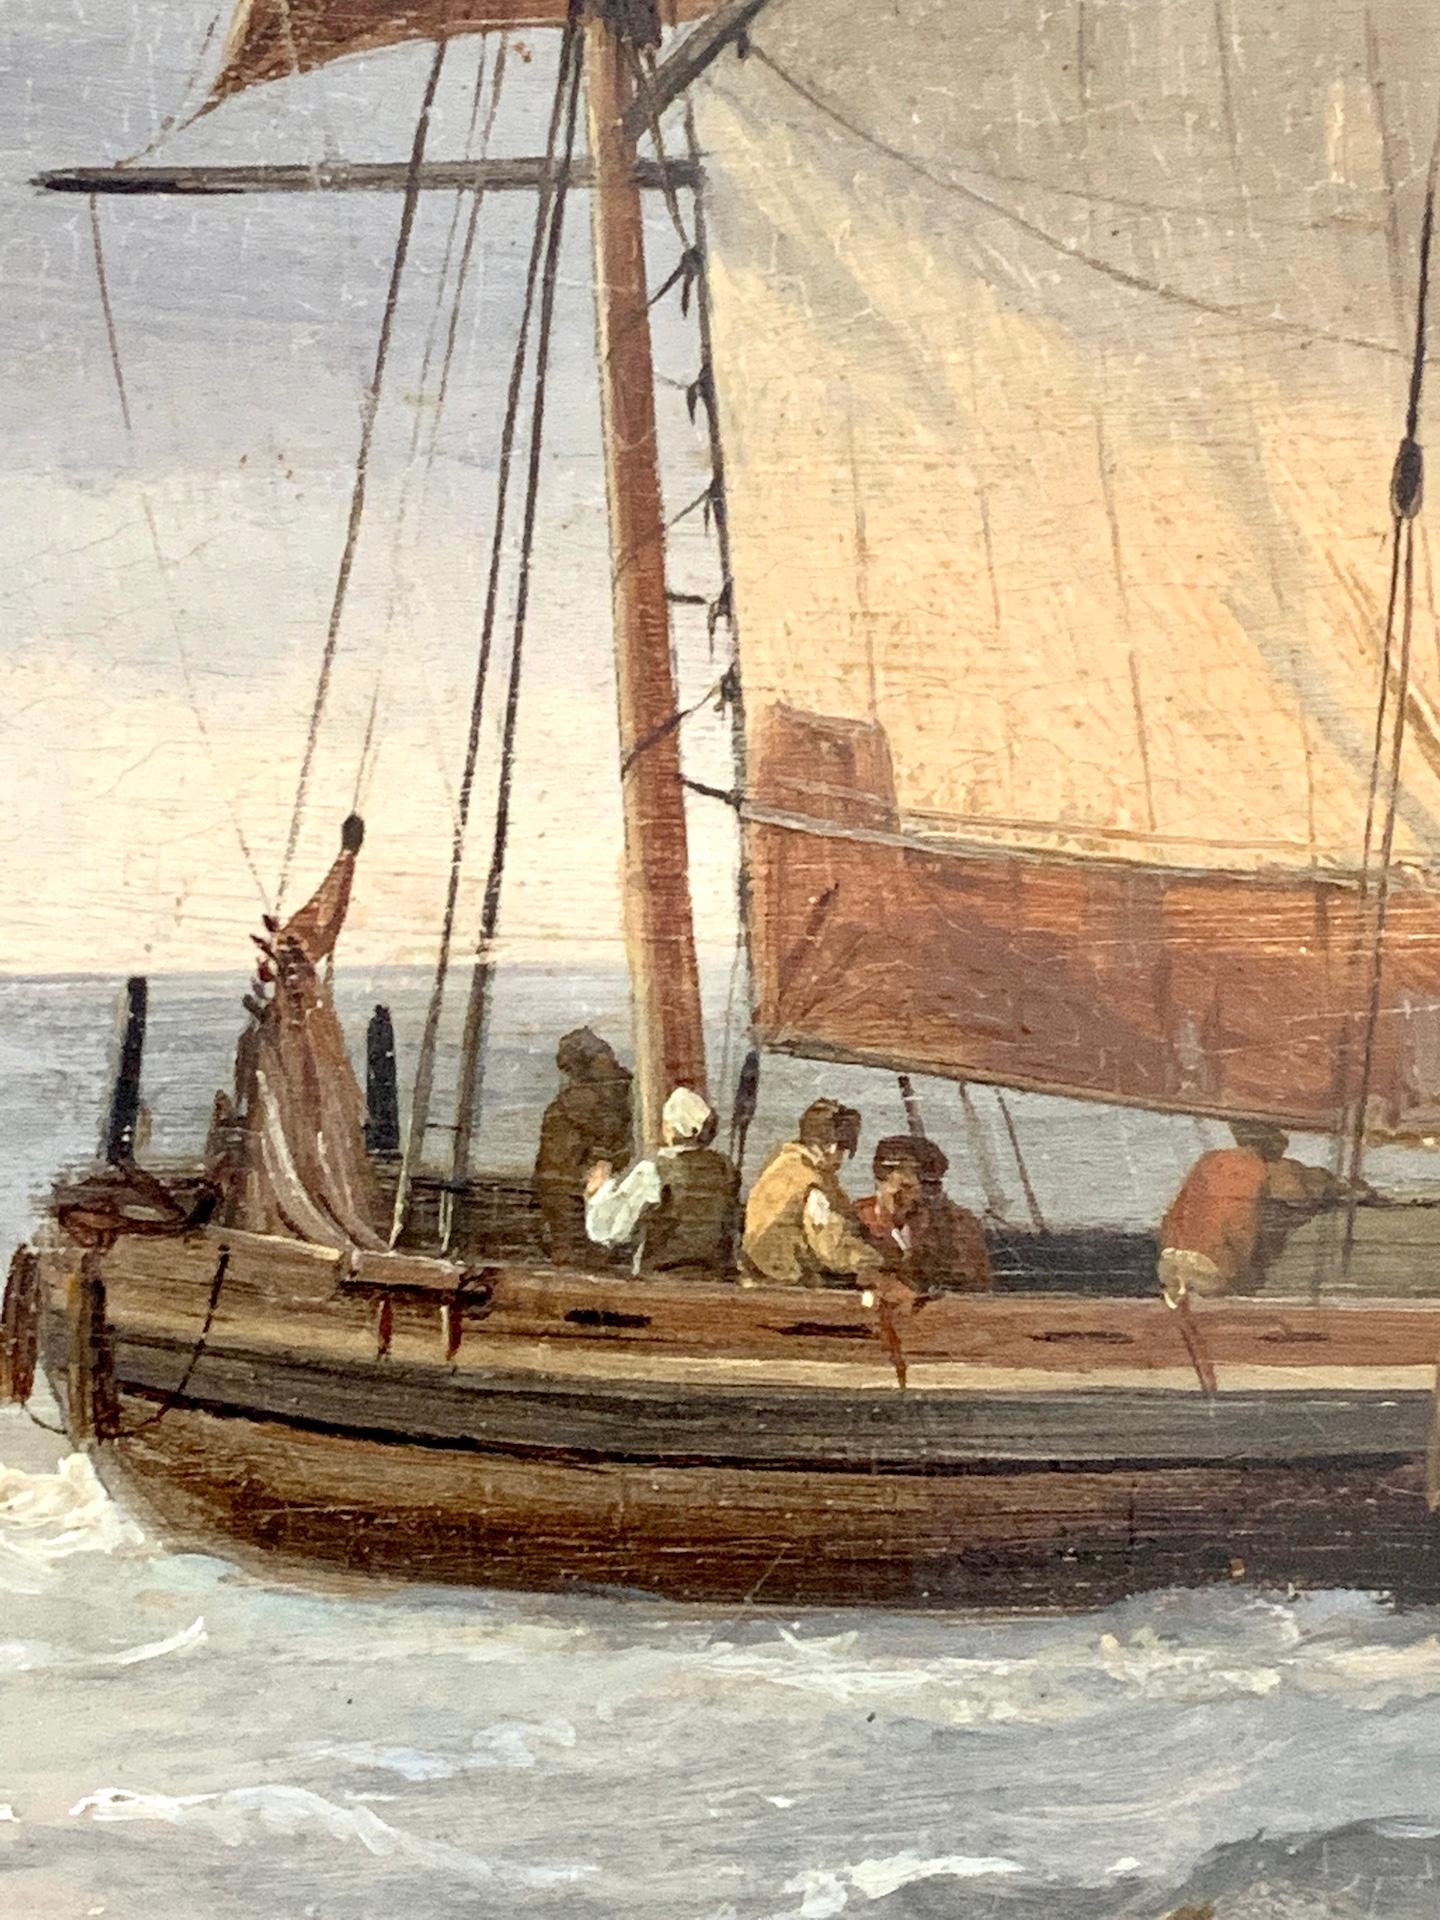 English early 19th century Marine scene of fishing boats at sea , with a landscape and people in the foreground.

Born in Chichester, C M Powell was a self-taught artist, a fact which reflects great credit on him when one considers the beautiful